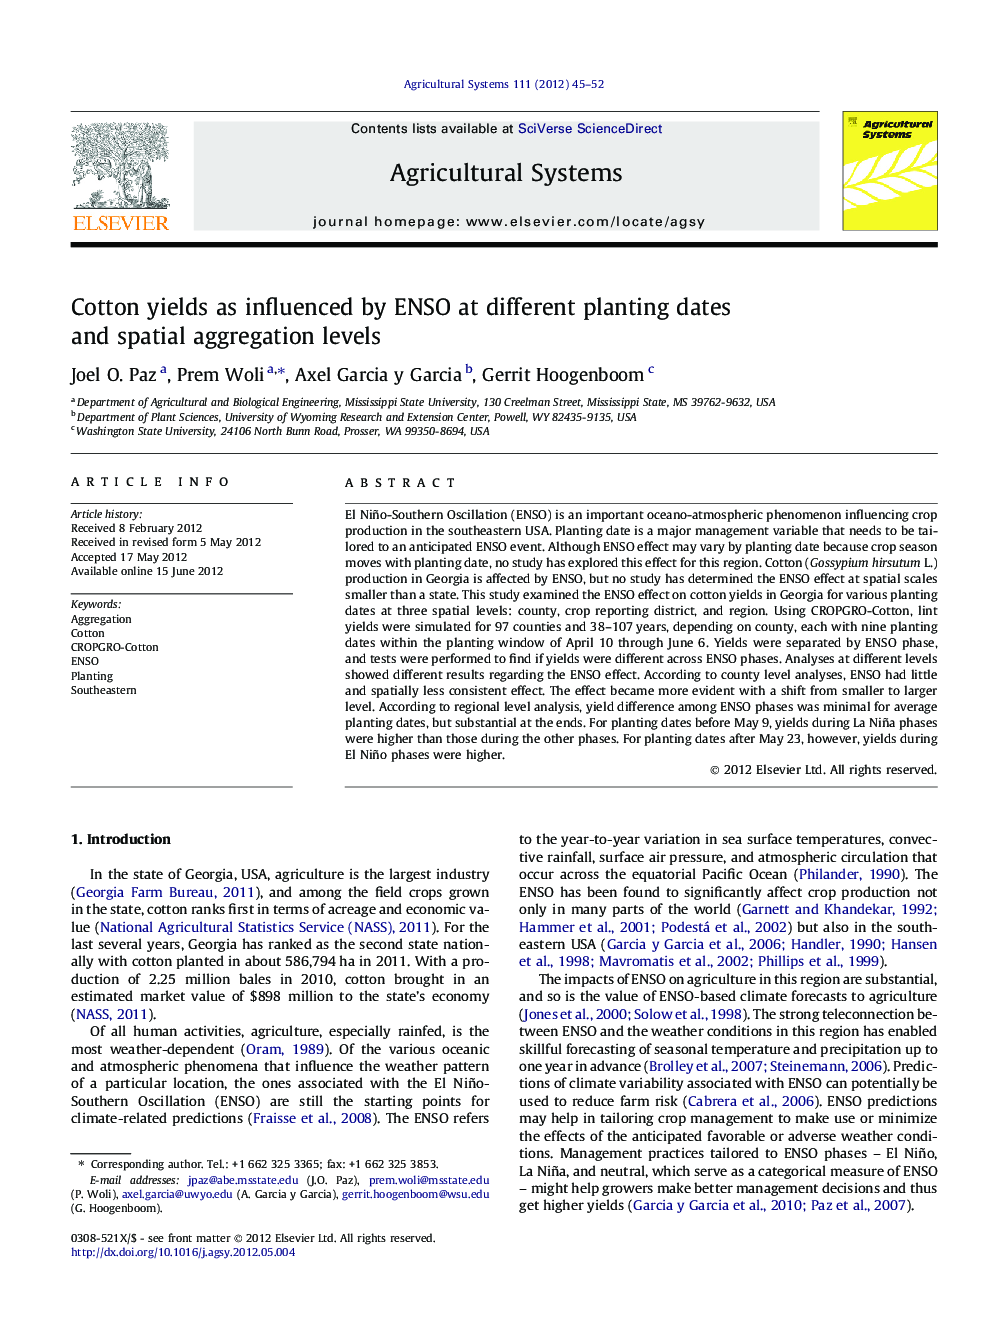 Cotton yields as influenced by ENSO at different planting dates and spatial aggregation levels